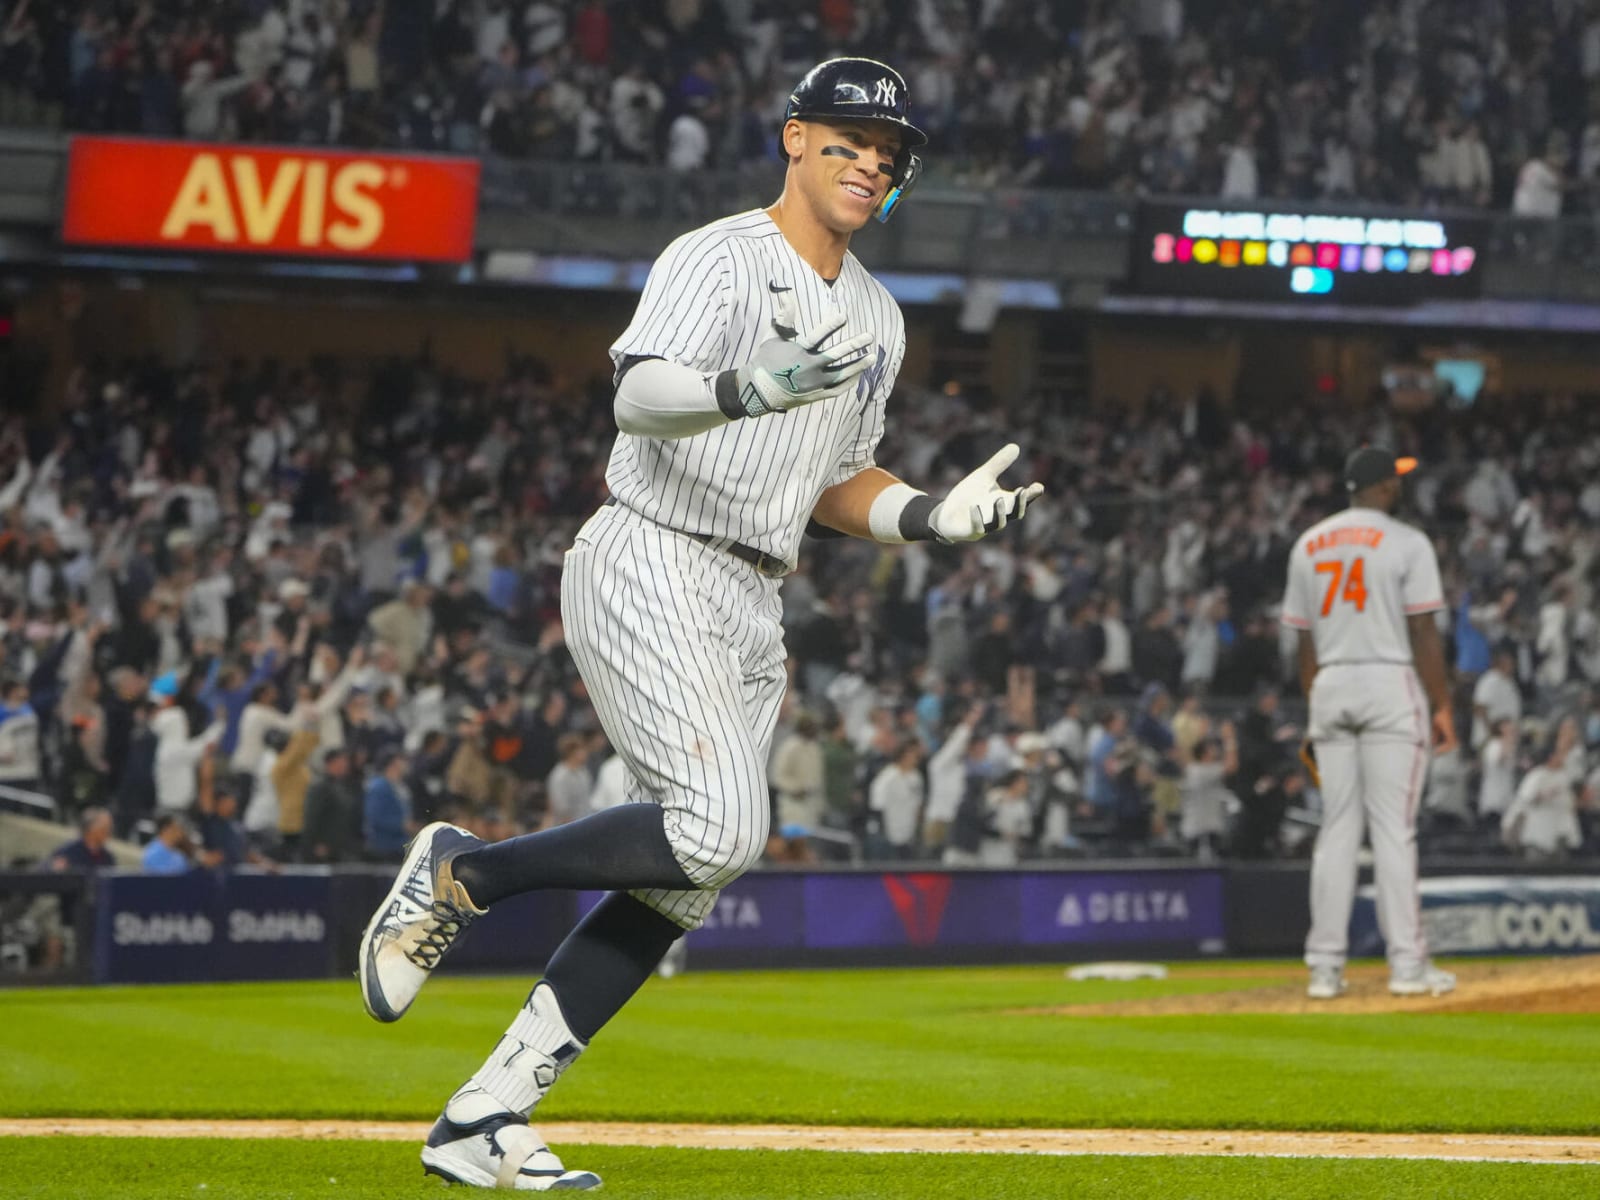 Yankees' Aaron Judge and the importance of the yankees mlb jersey 74 walk